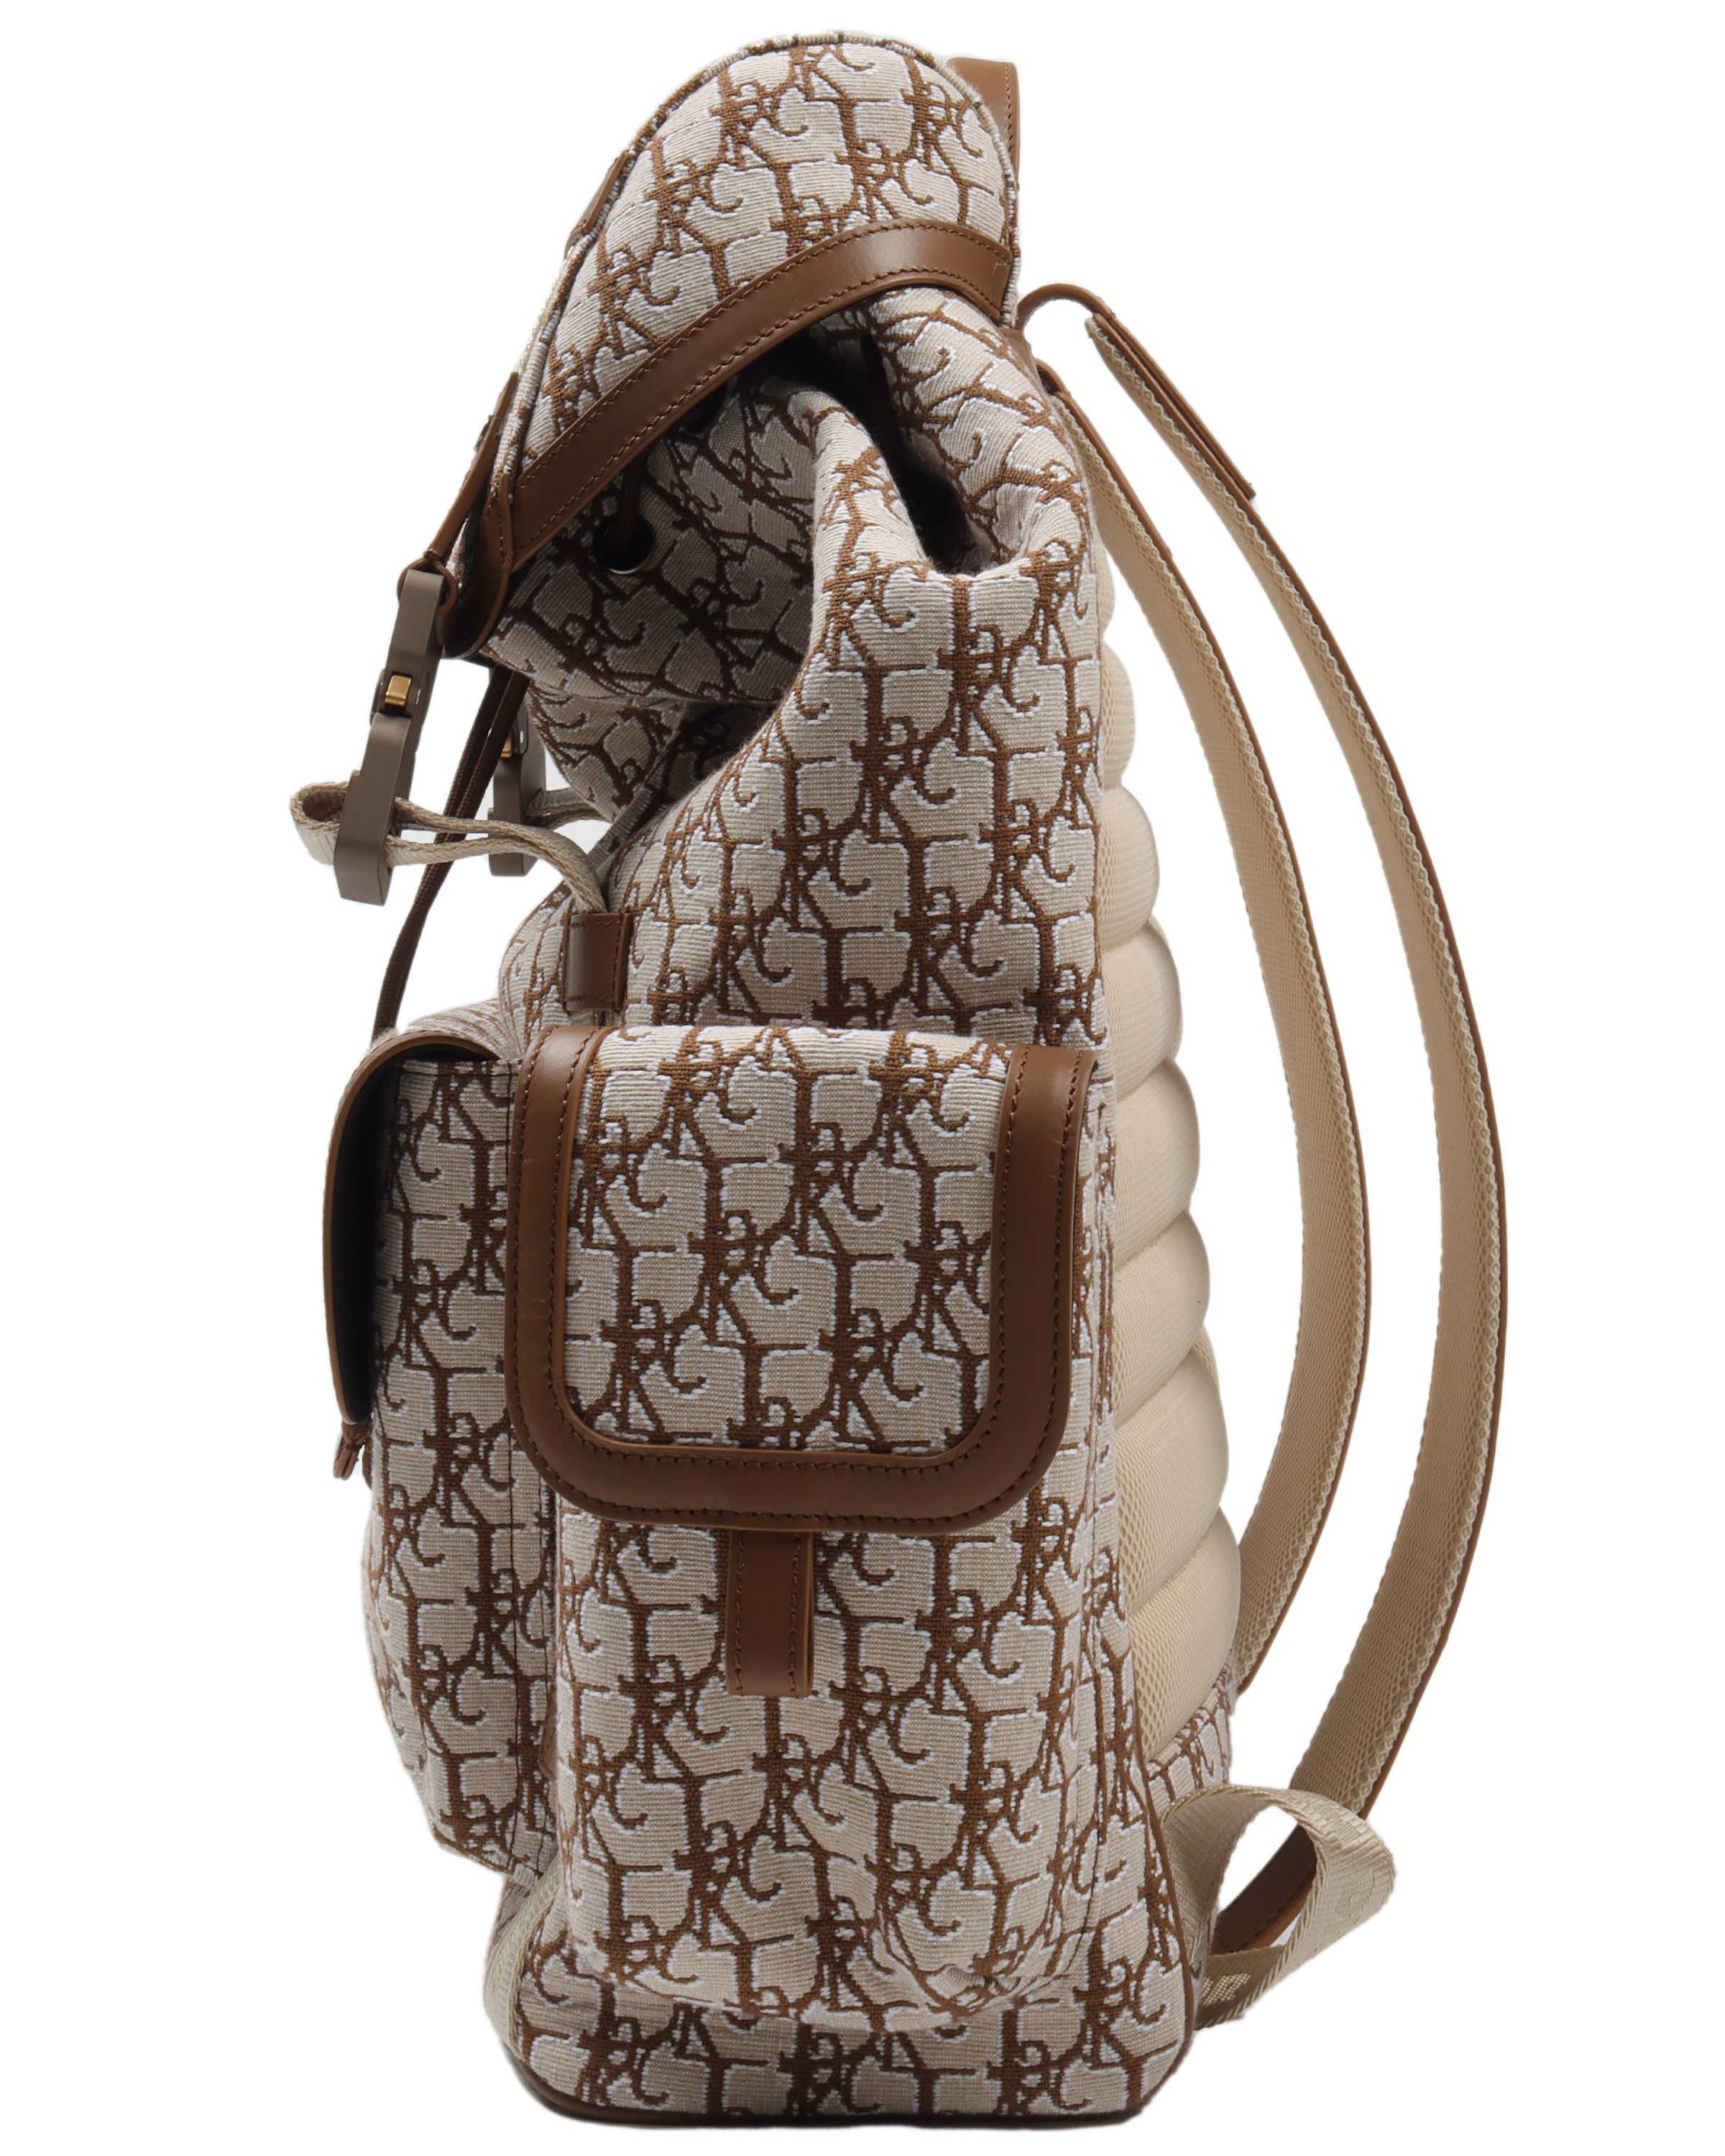 "Hit The Road" Cactus Jack Dior Backpack